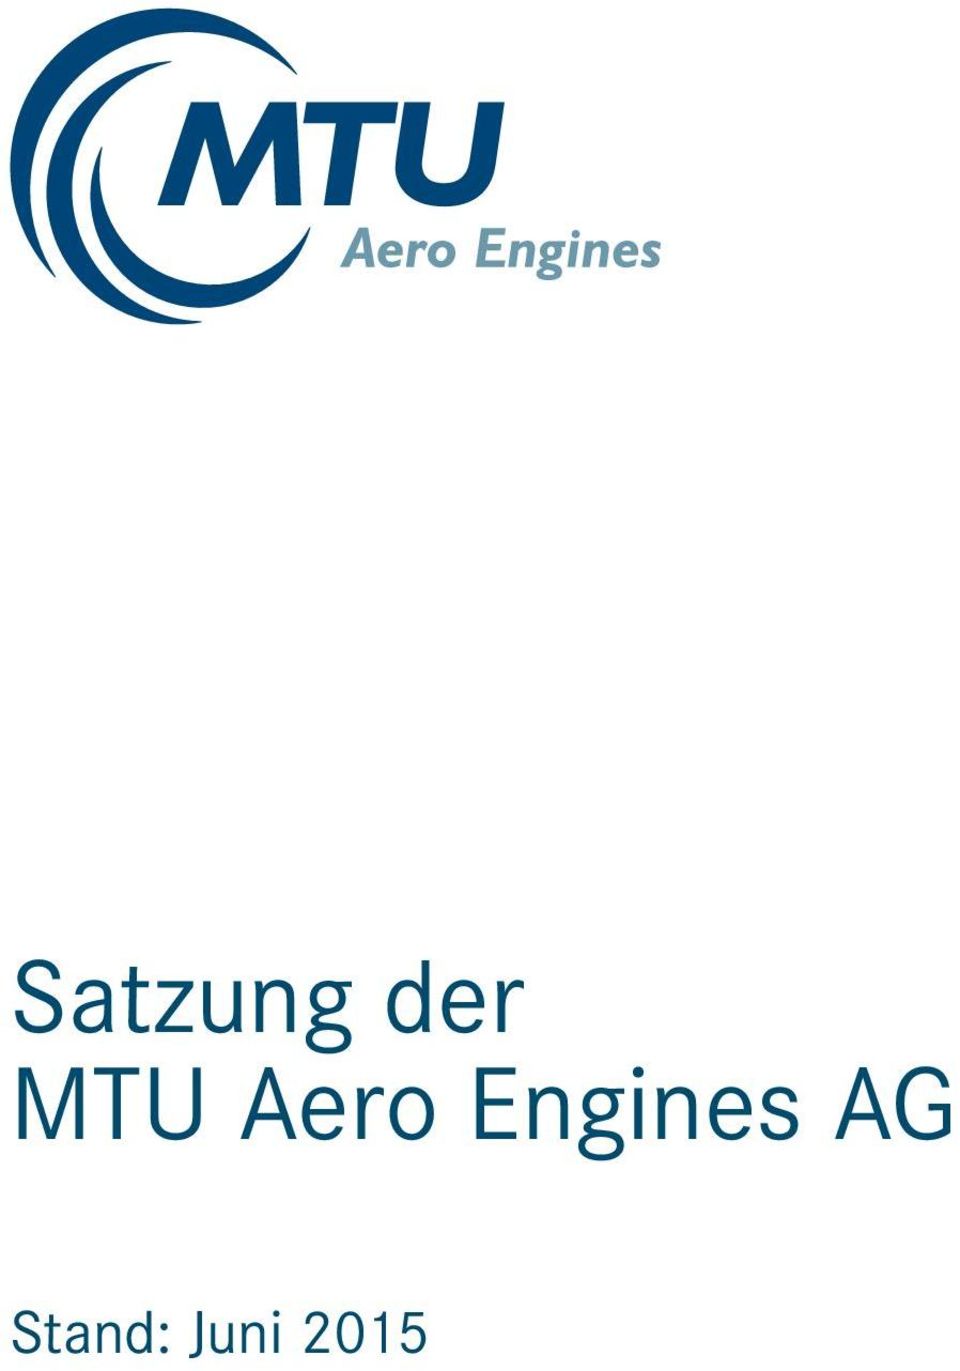 Engines AG